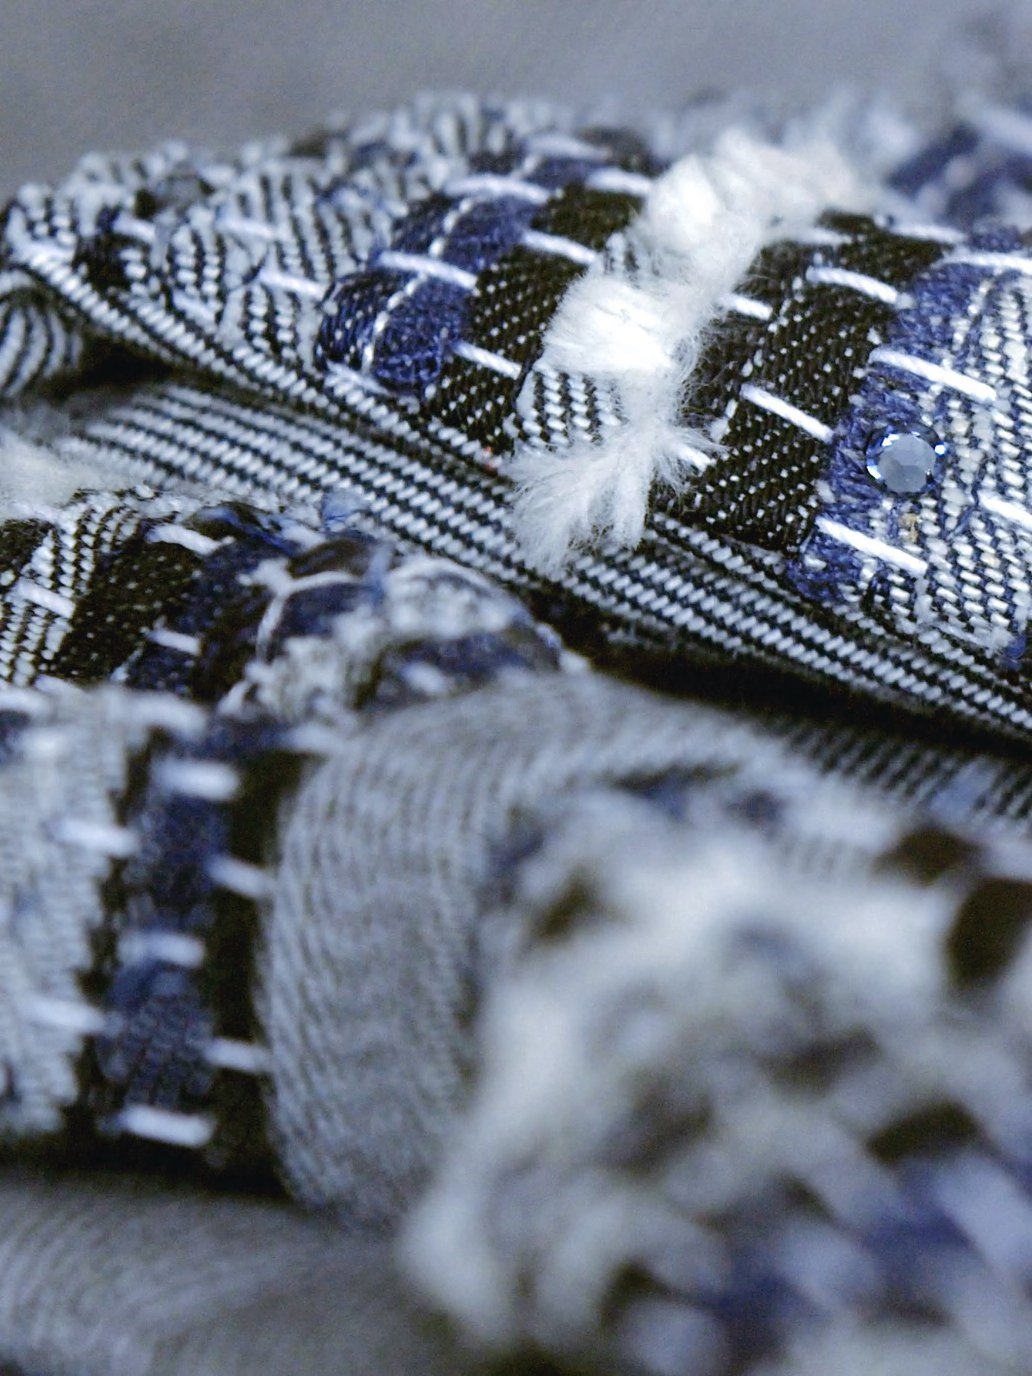 Upcycling denim by using a traditional Japanese weaving method: Sakiori